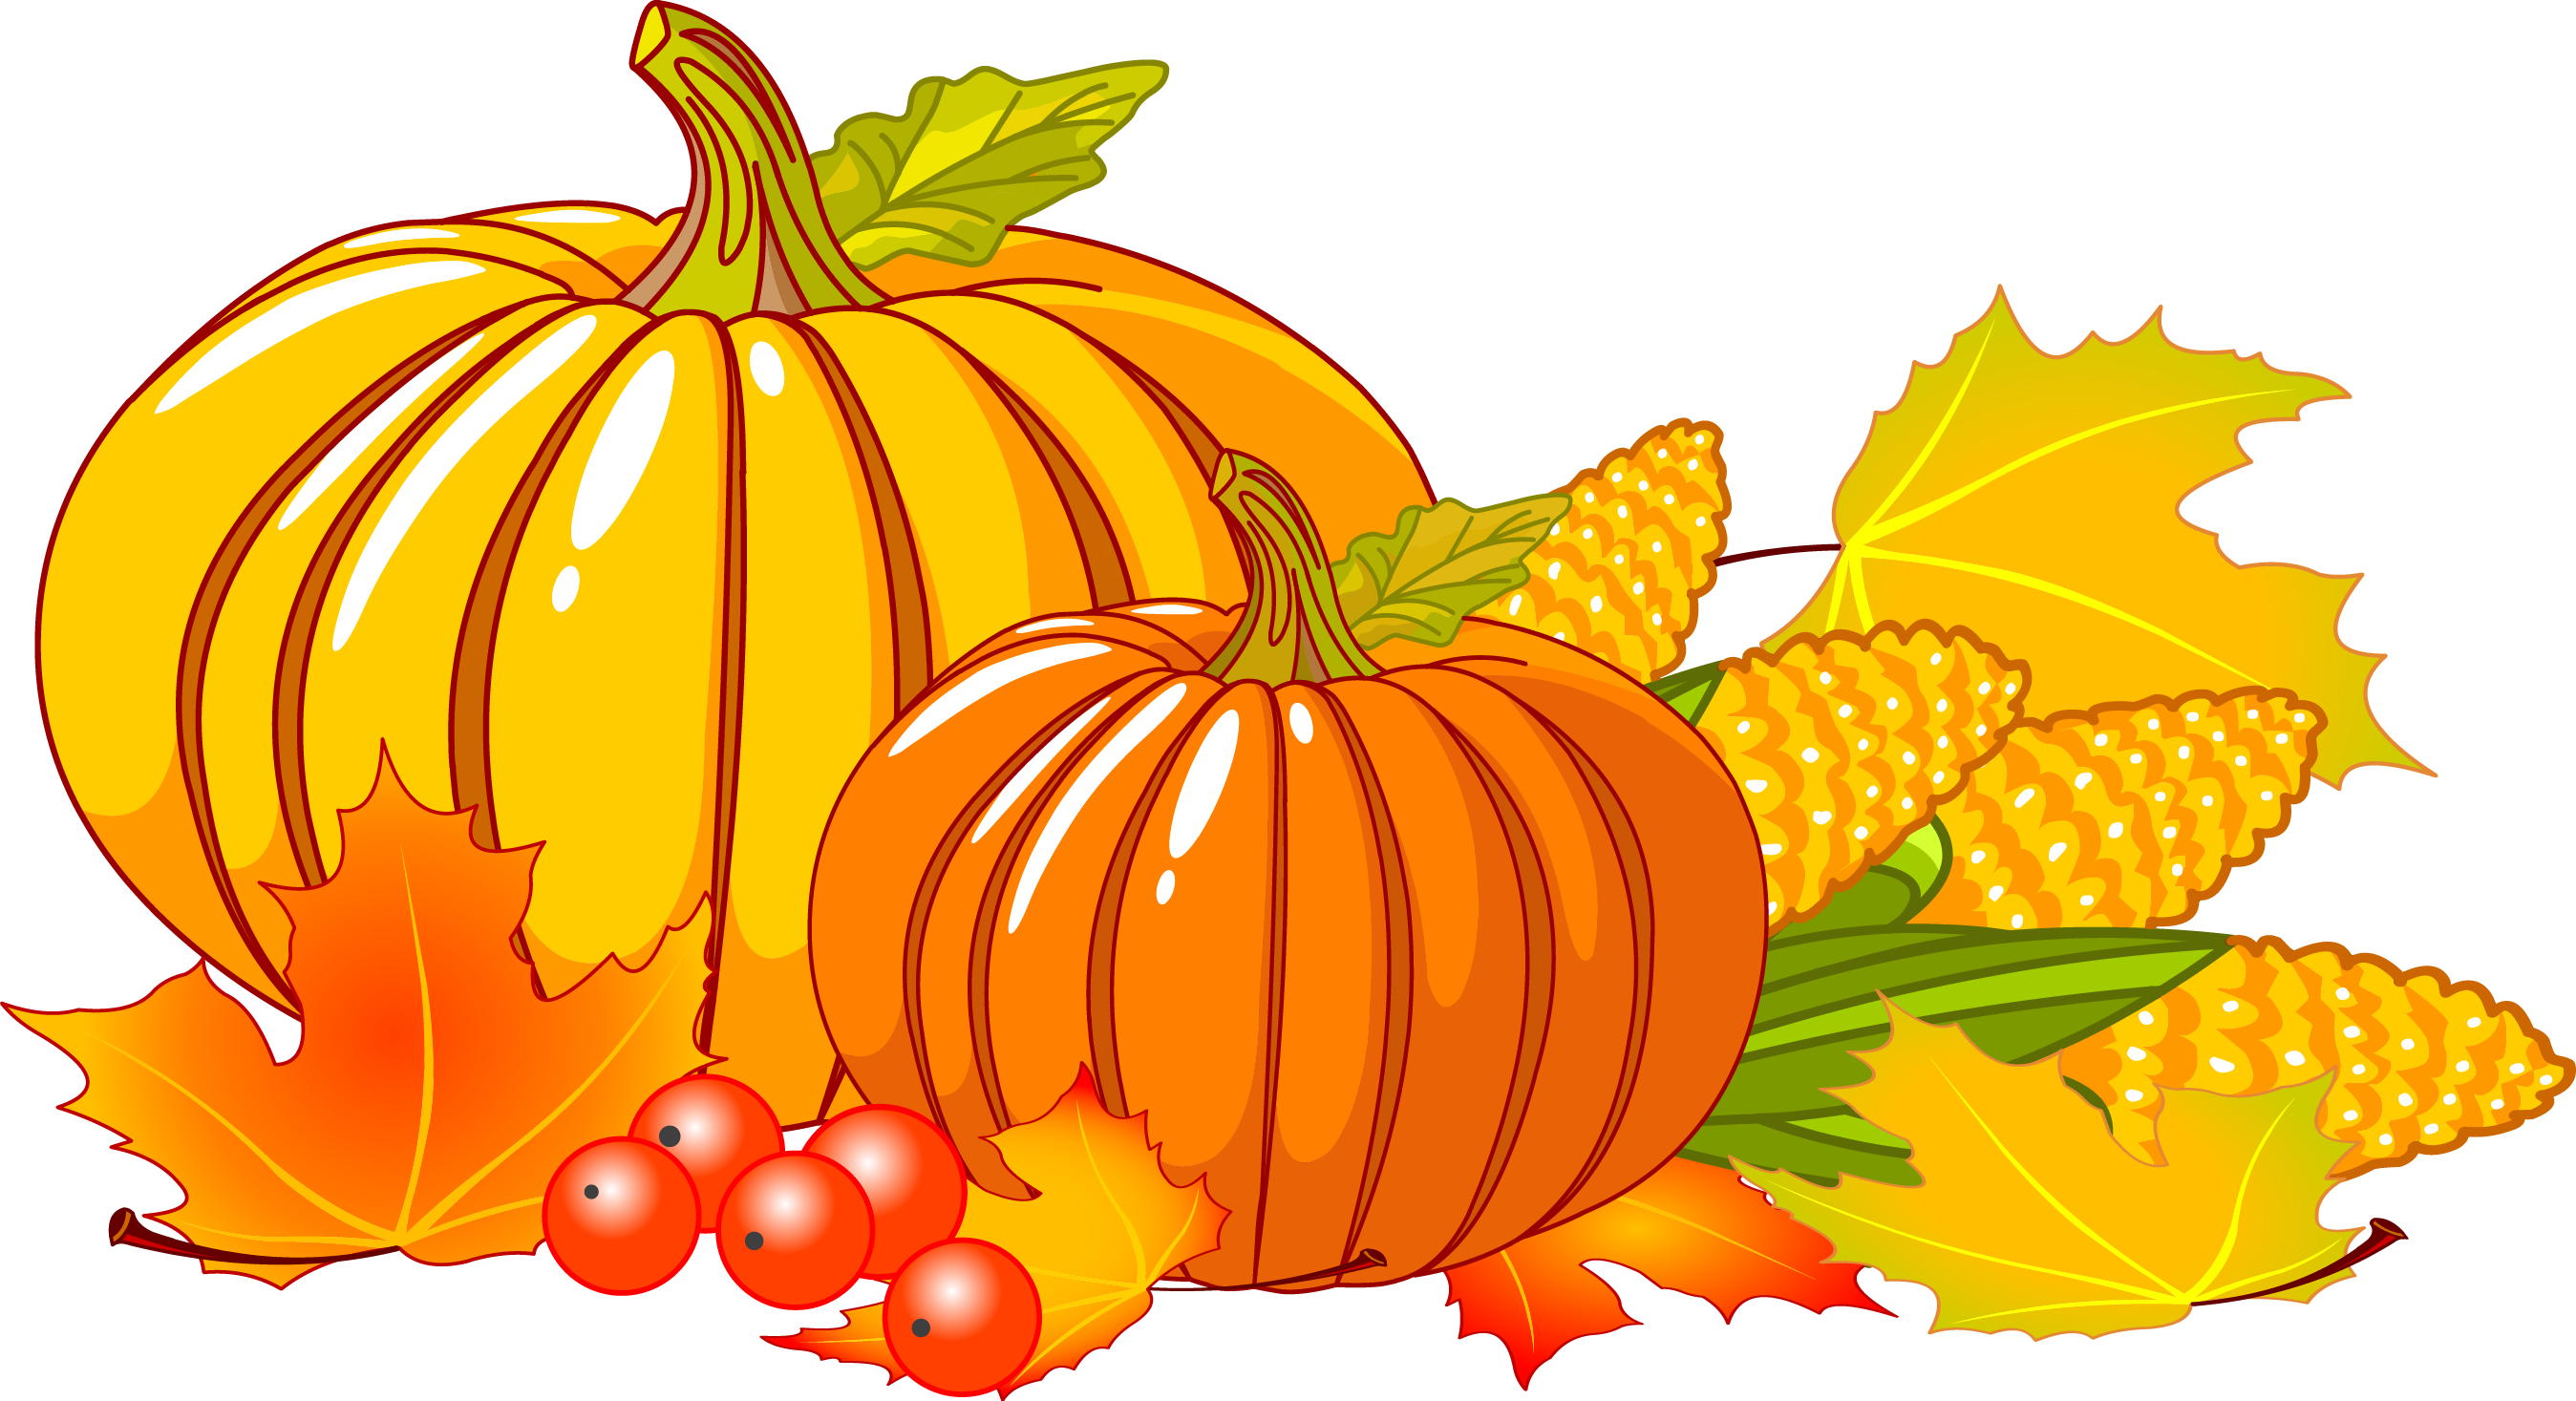 Download PNG image - Fall Harvest PNG Pic 